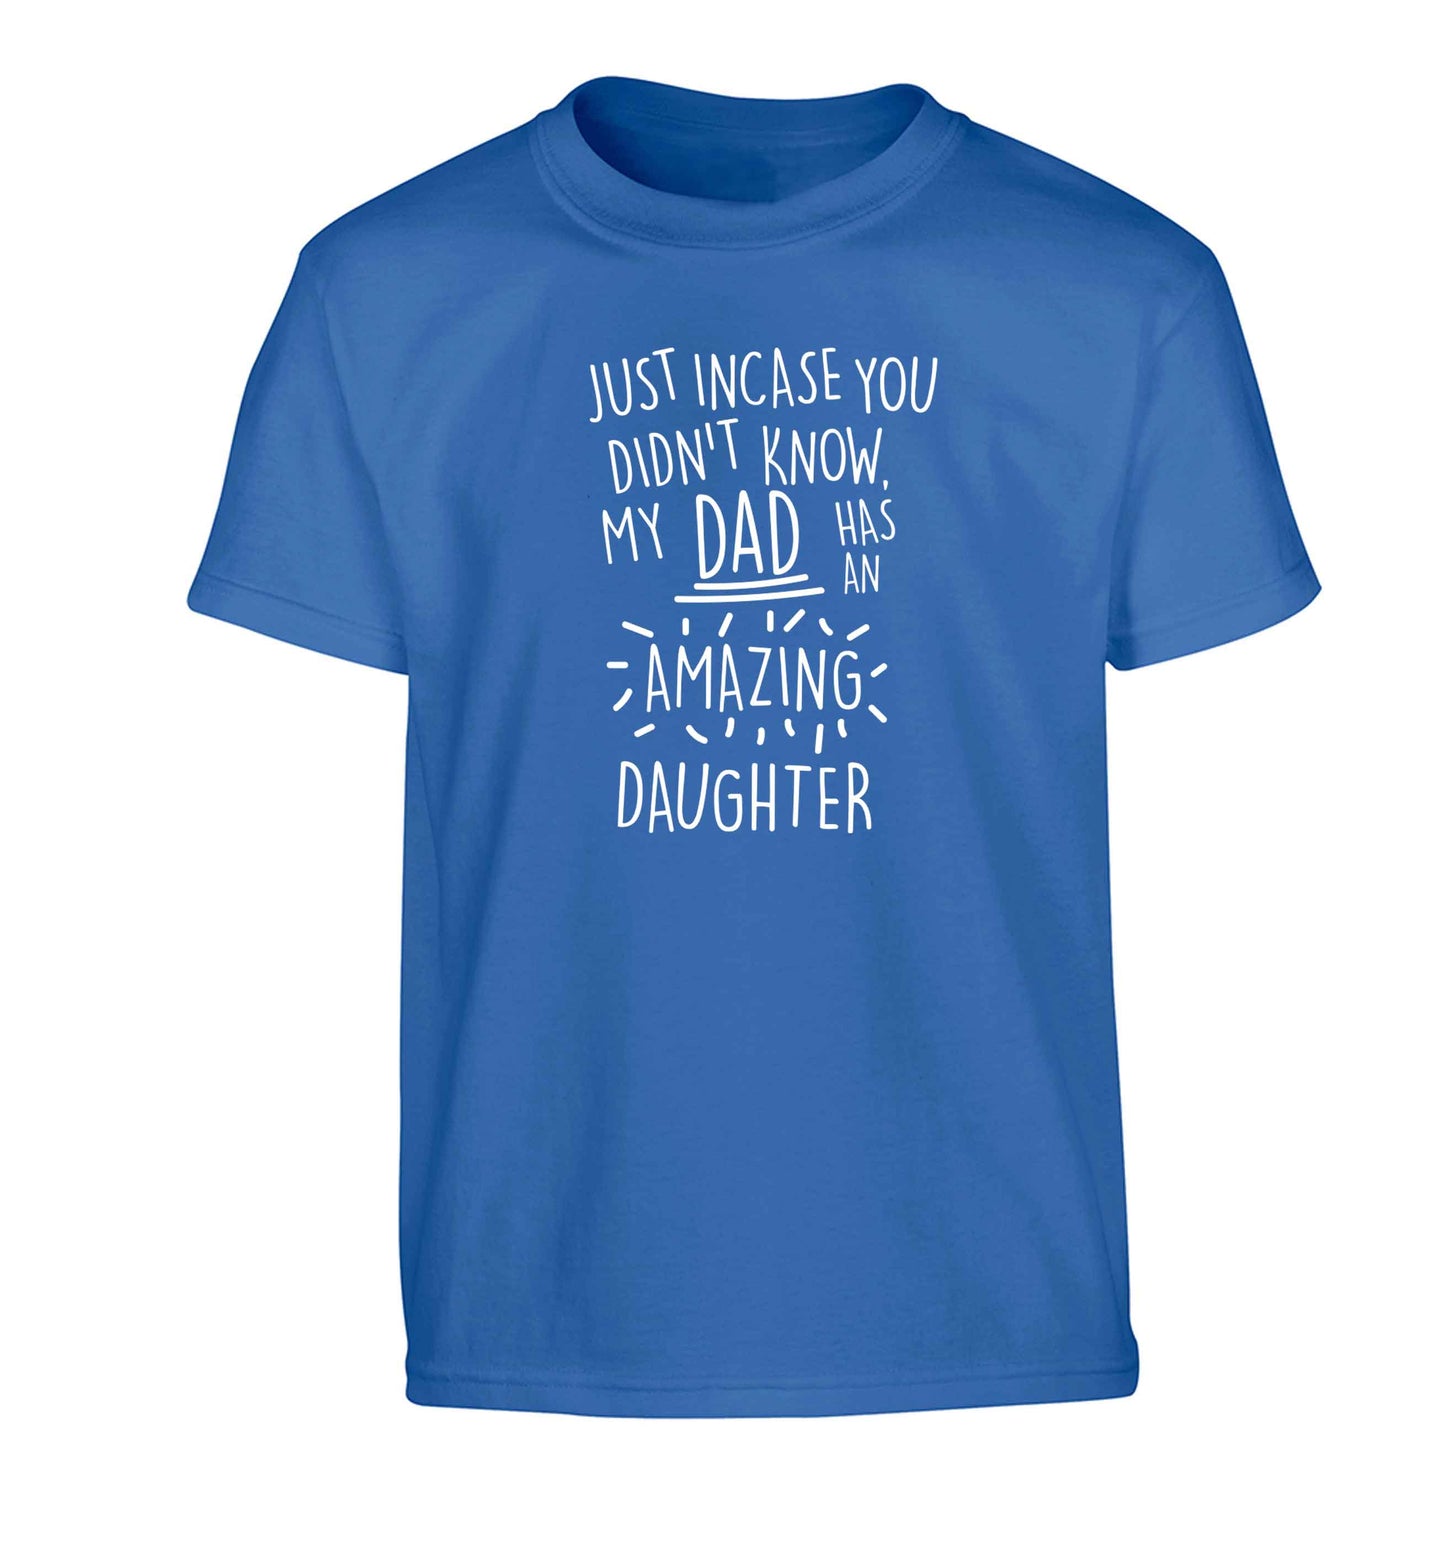 Just incase you didn't know my dad has an amazing daughter Children's blue Tshirt 12-13 Years